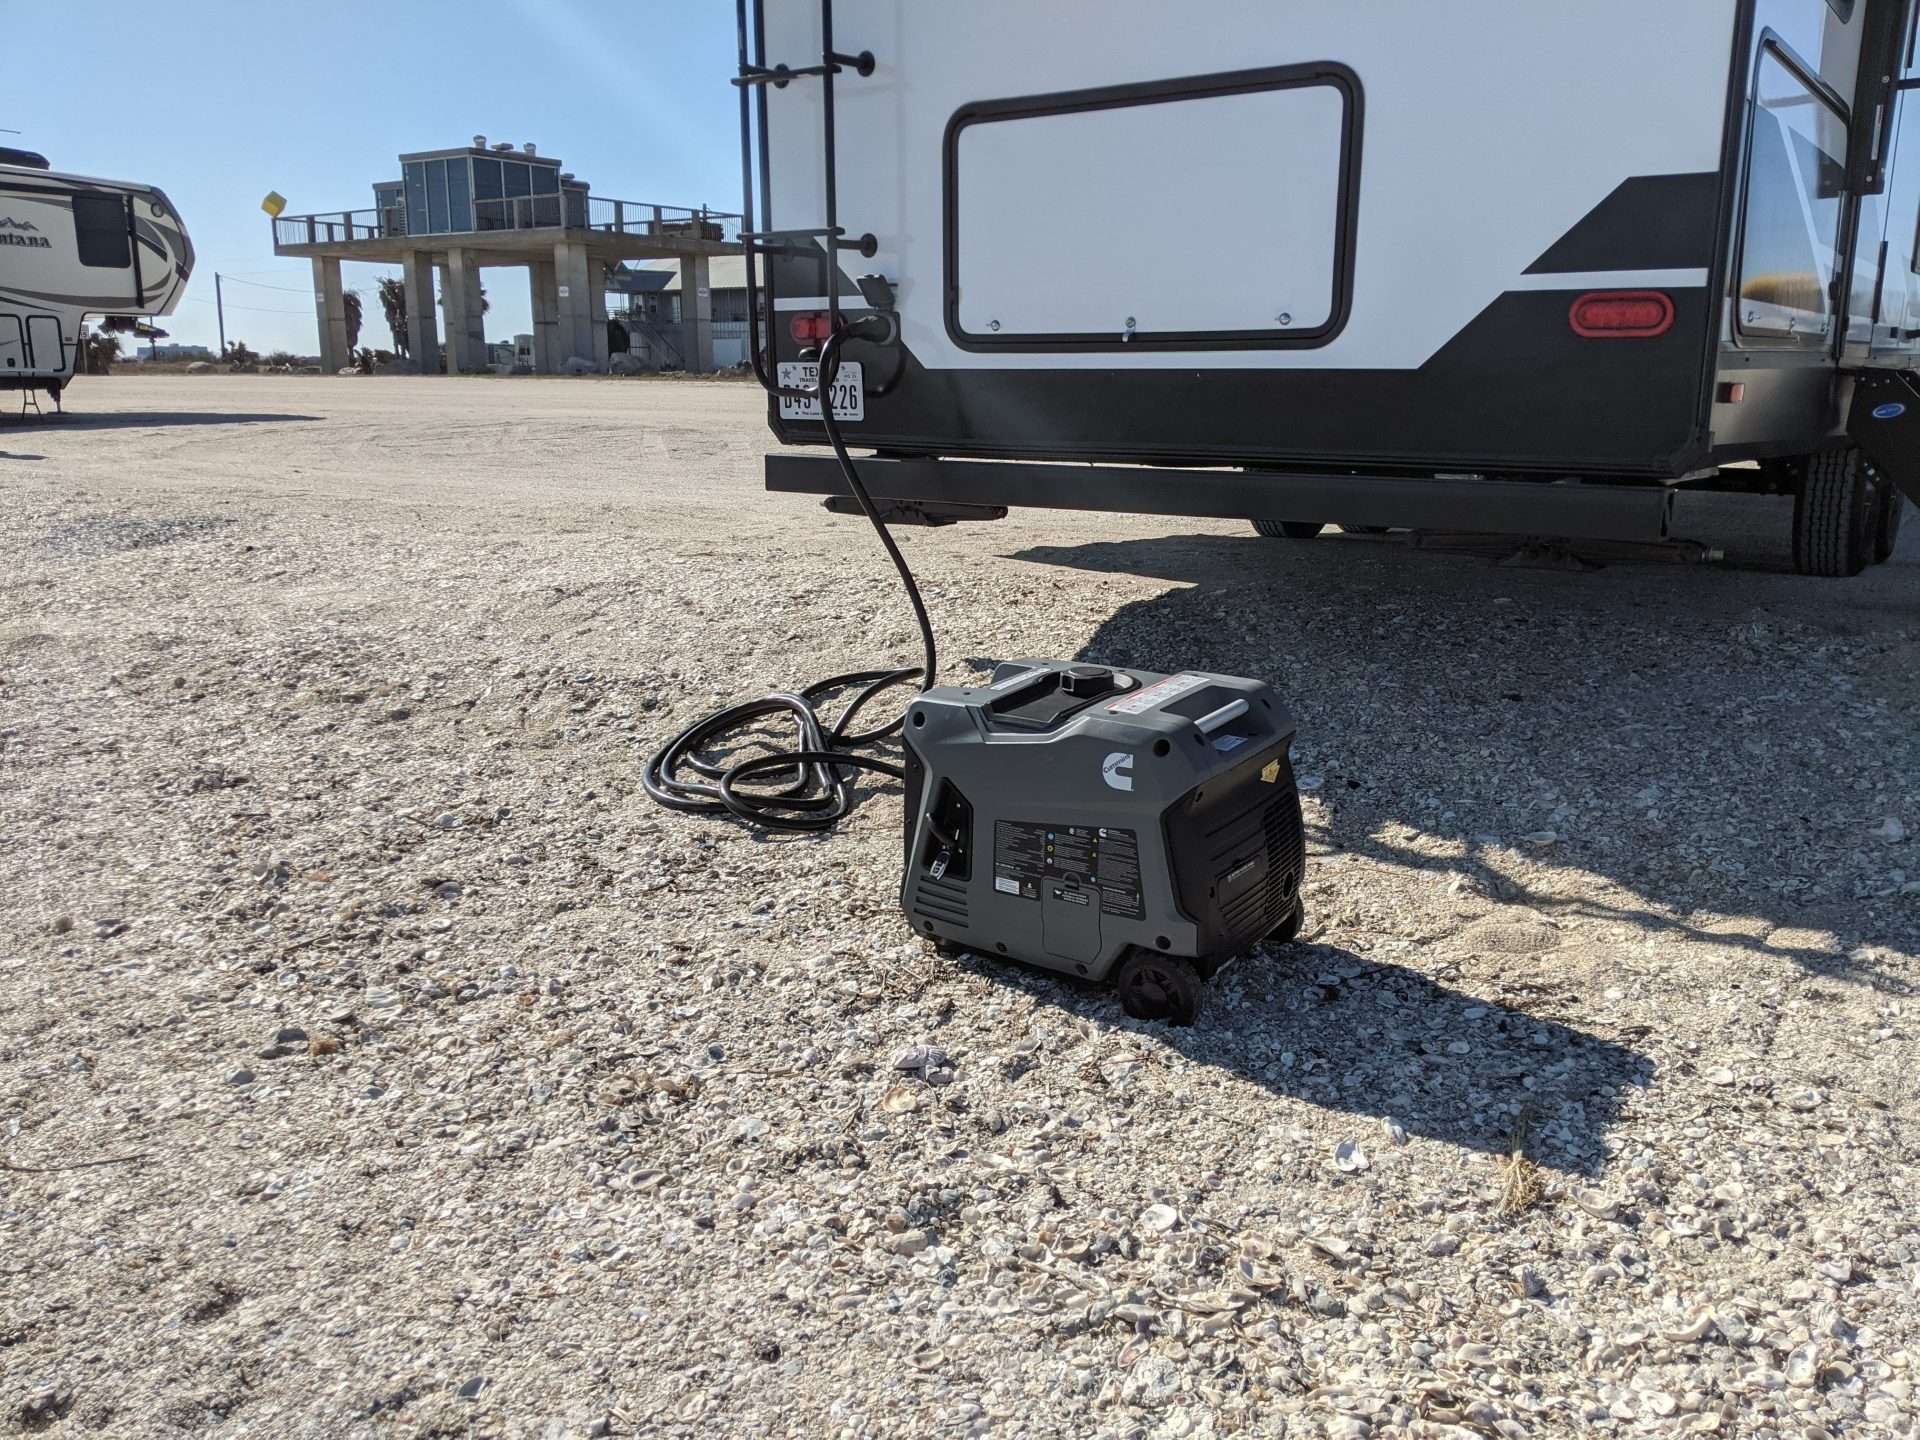 RV at campsite with generator plugged in